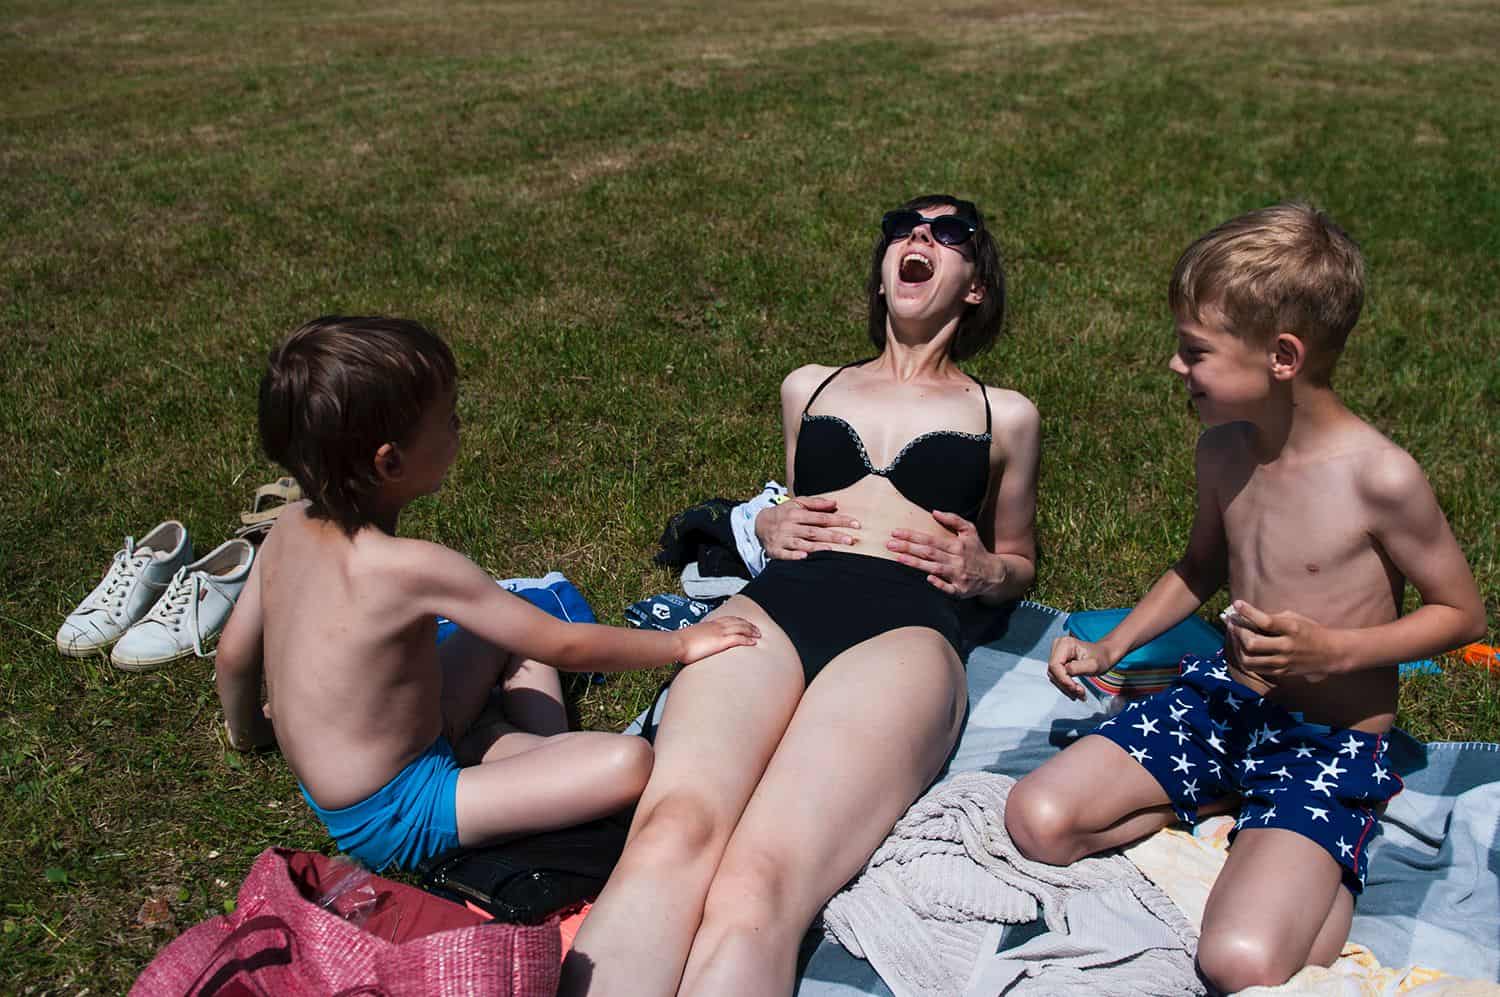 A mom in a black bikini and sunglasses lies on beach blankets with her sons and laughs wildly